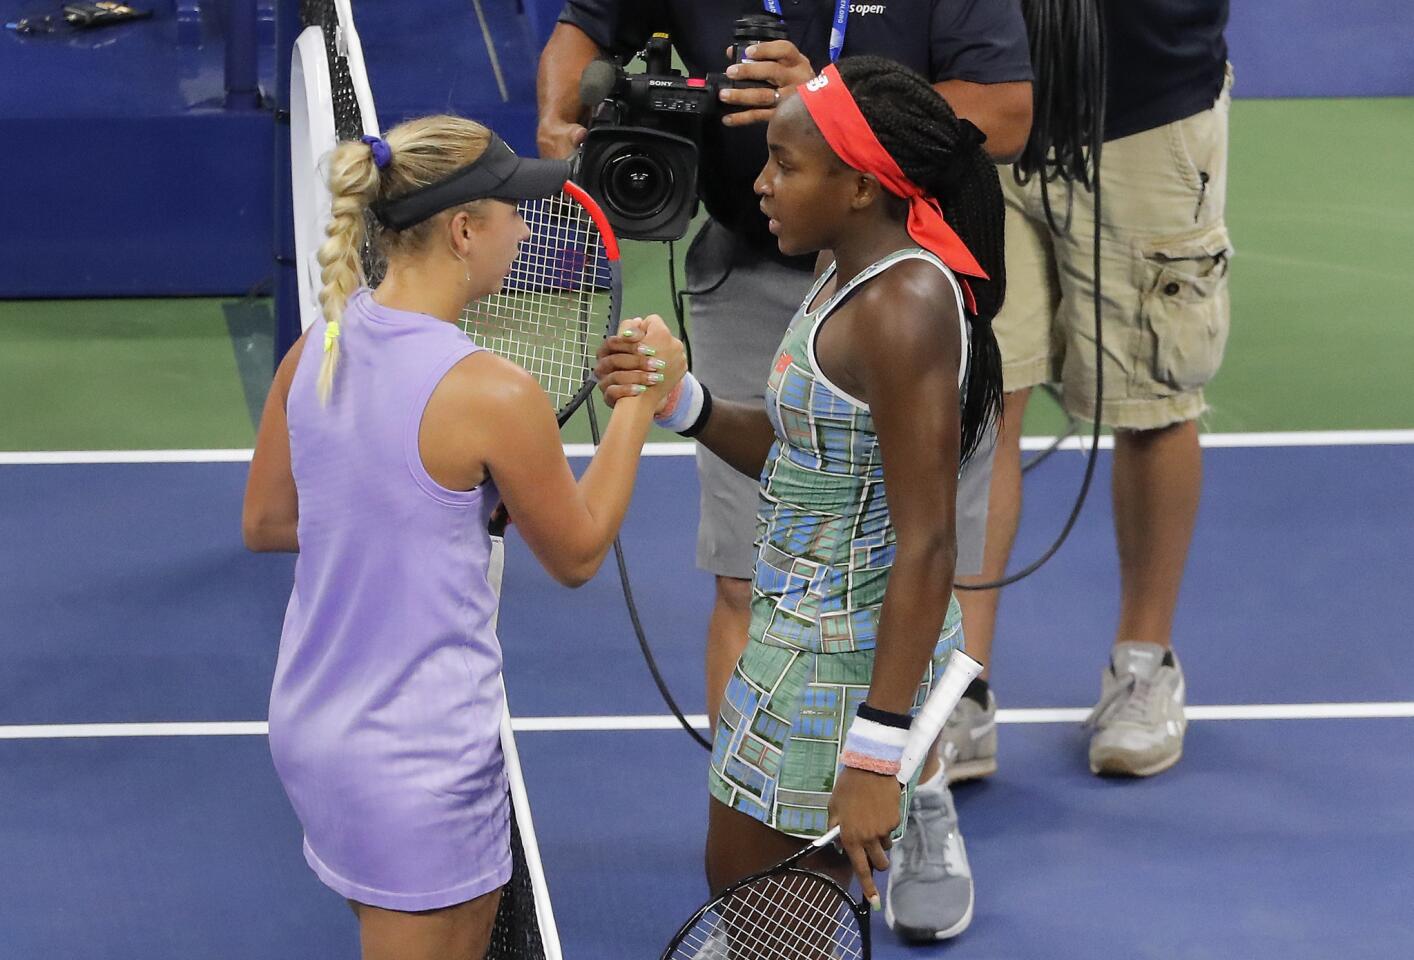 Coco Gauff, right, greets Anastasia Potapova after winning their match at the 2019 U.S. Open on Aug. 27, 2019, in Queens.